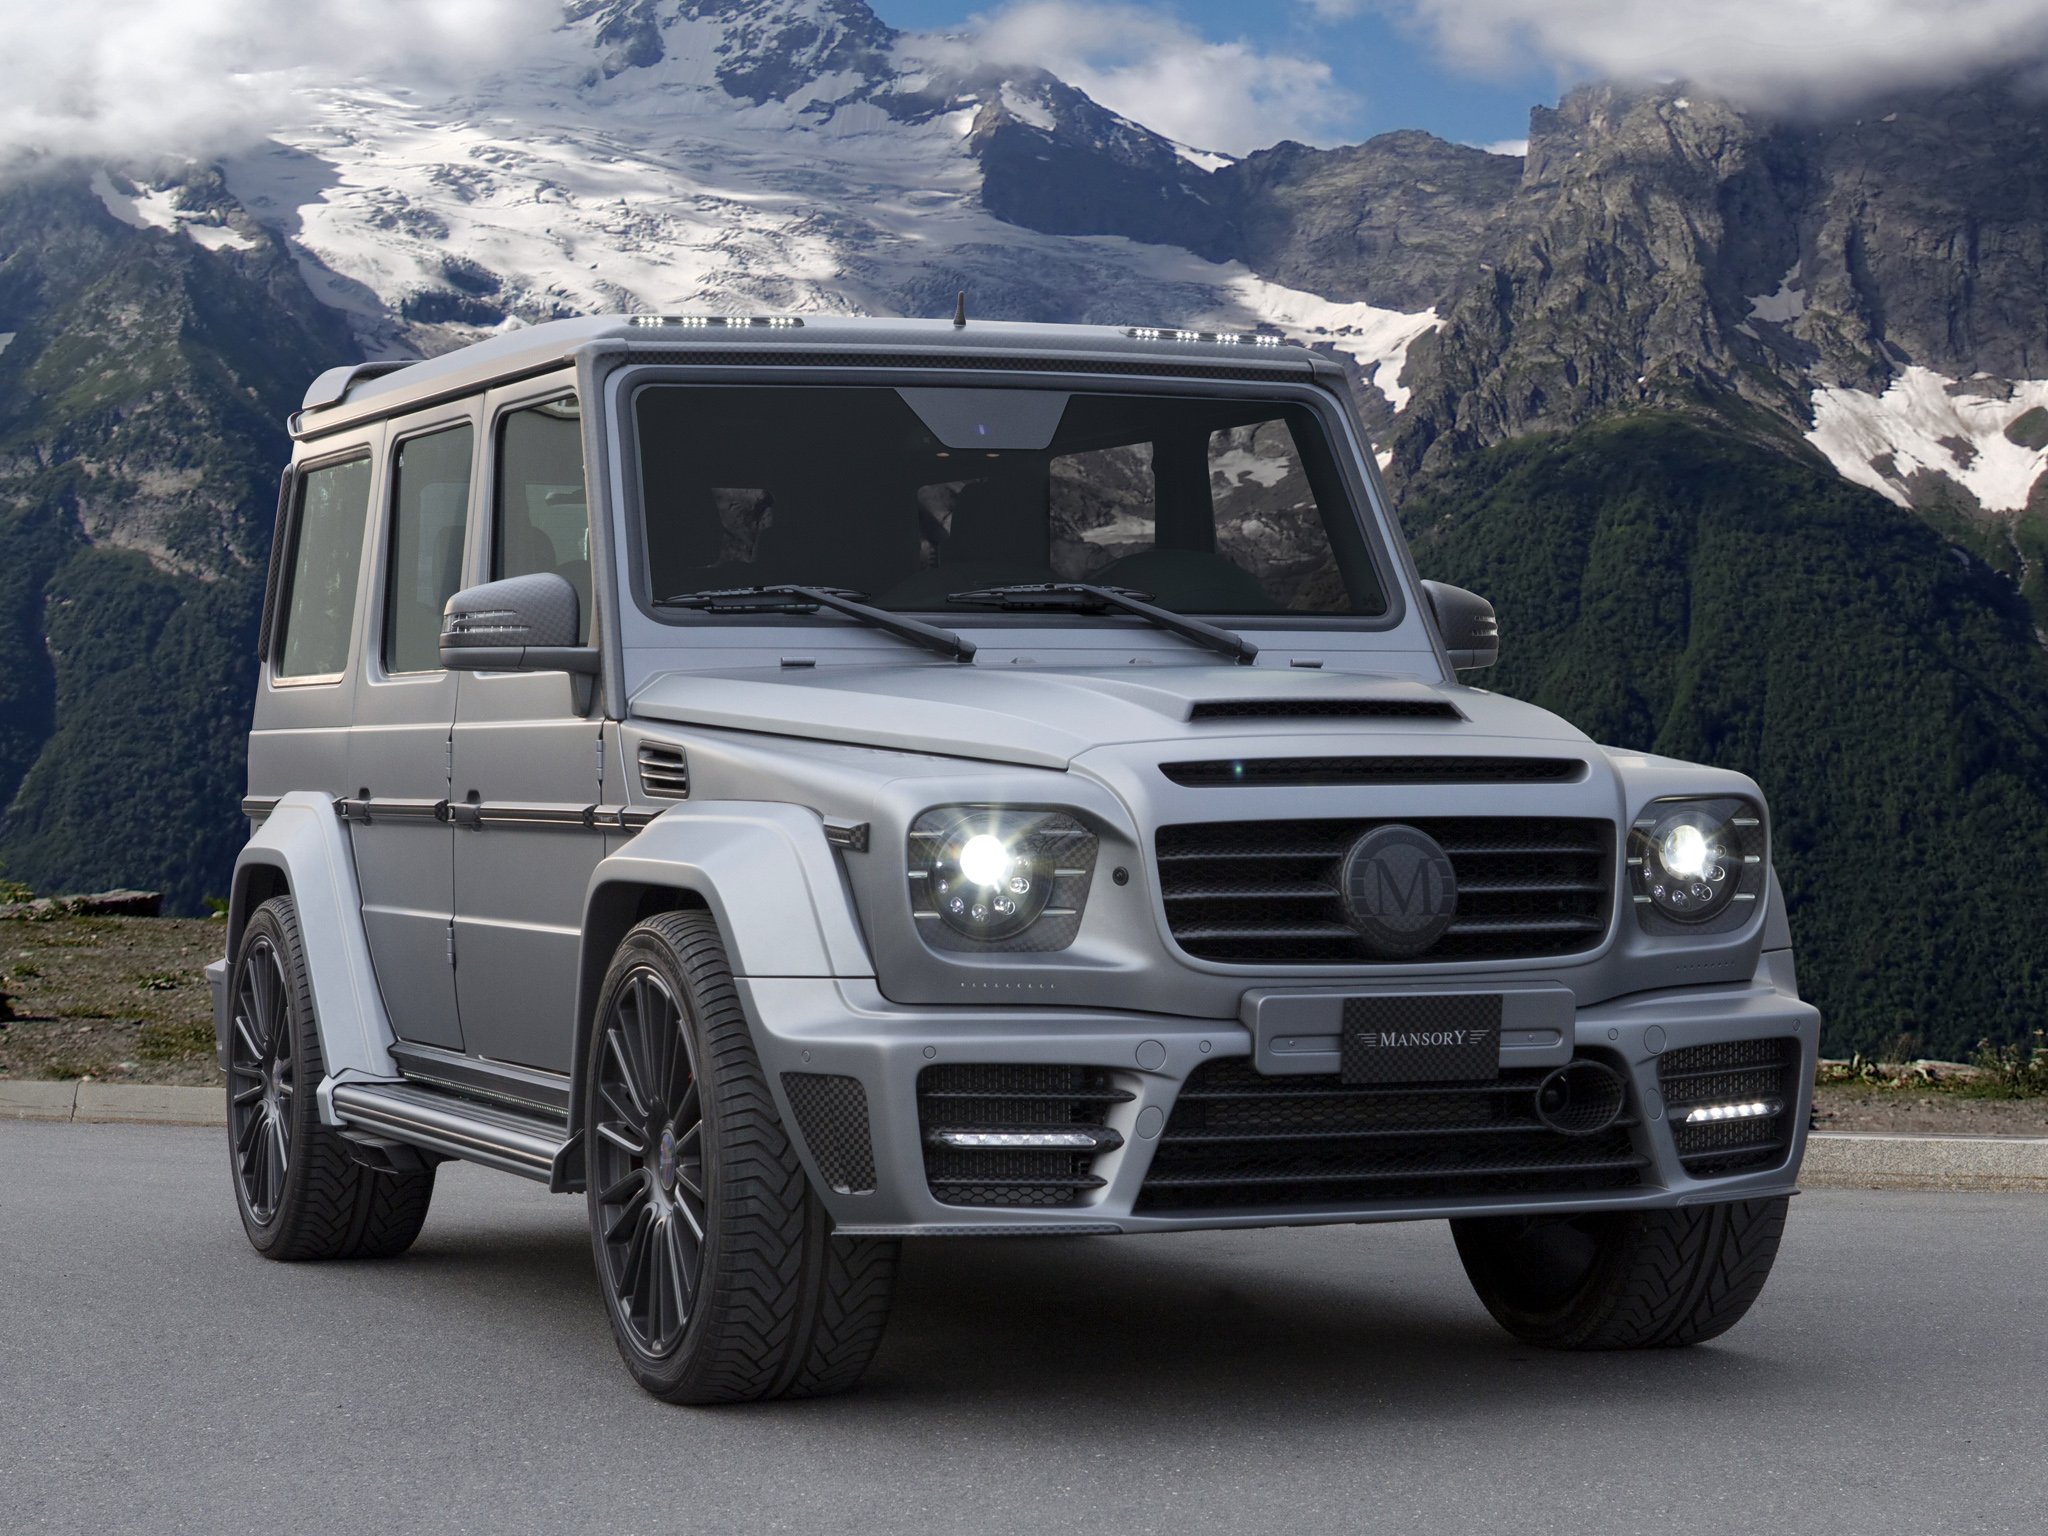 2013, Mansory, Gronos,  w463 , Mercedes, Benz, Suv, Tuning Wallpaper